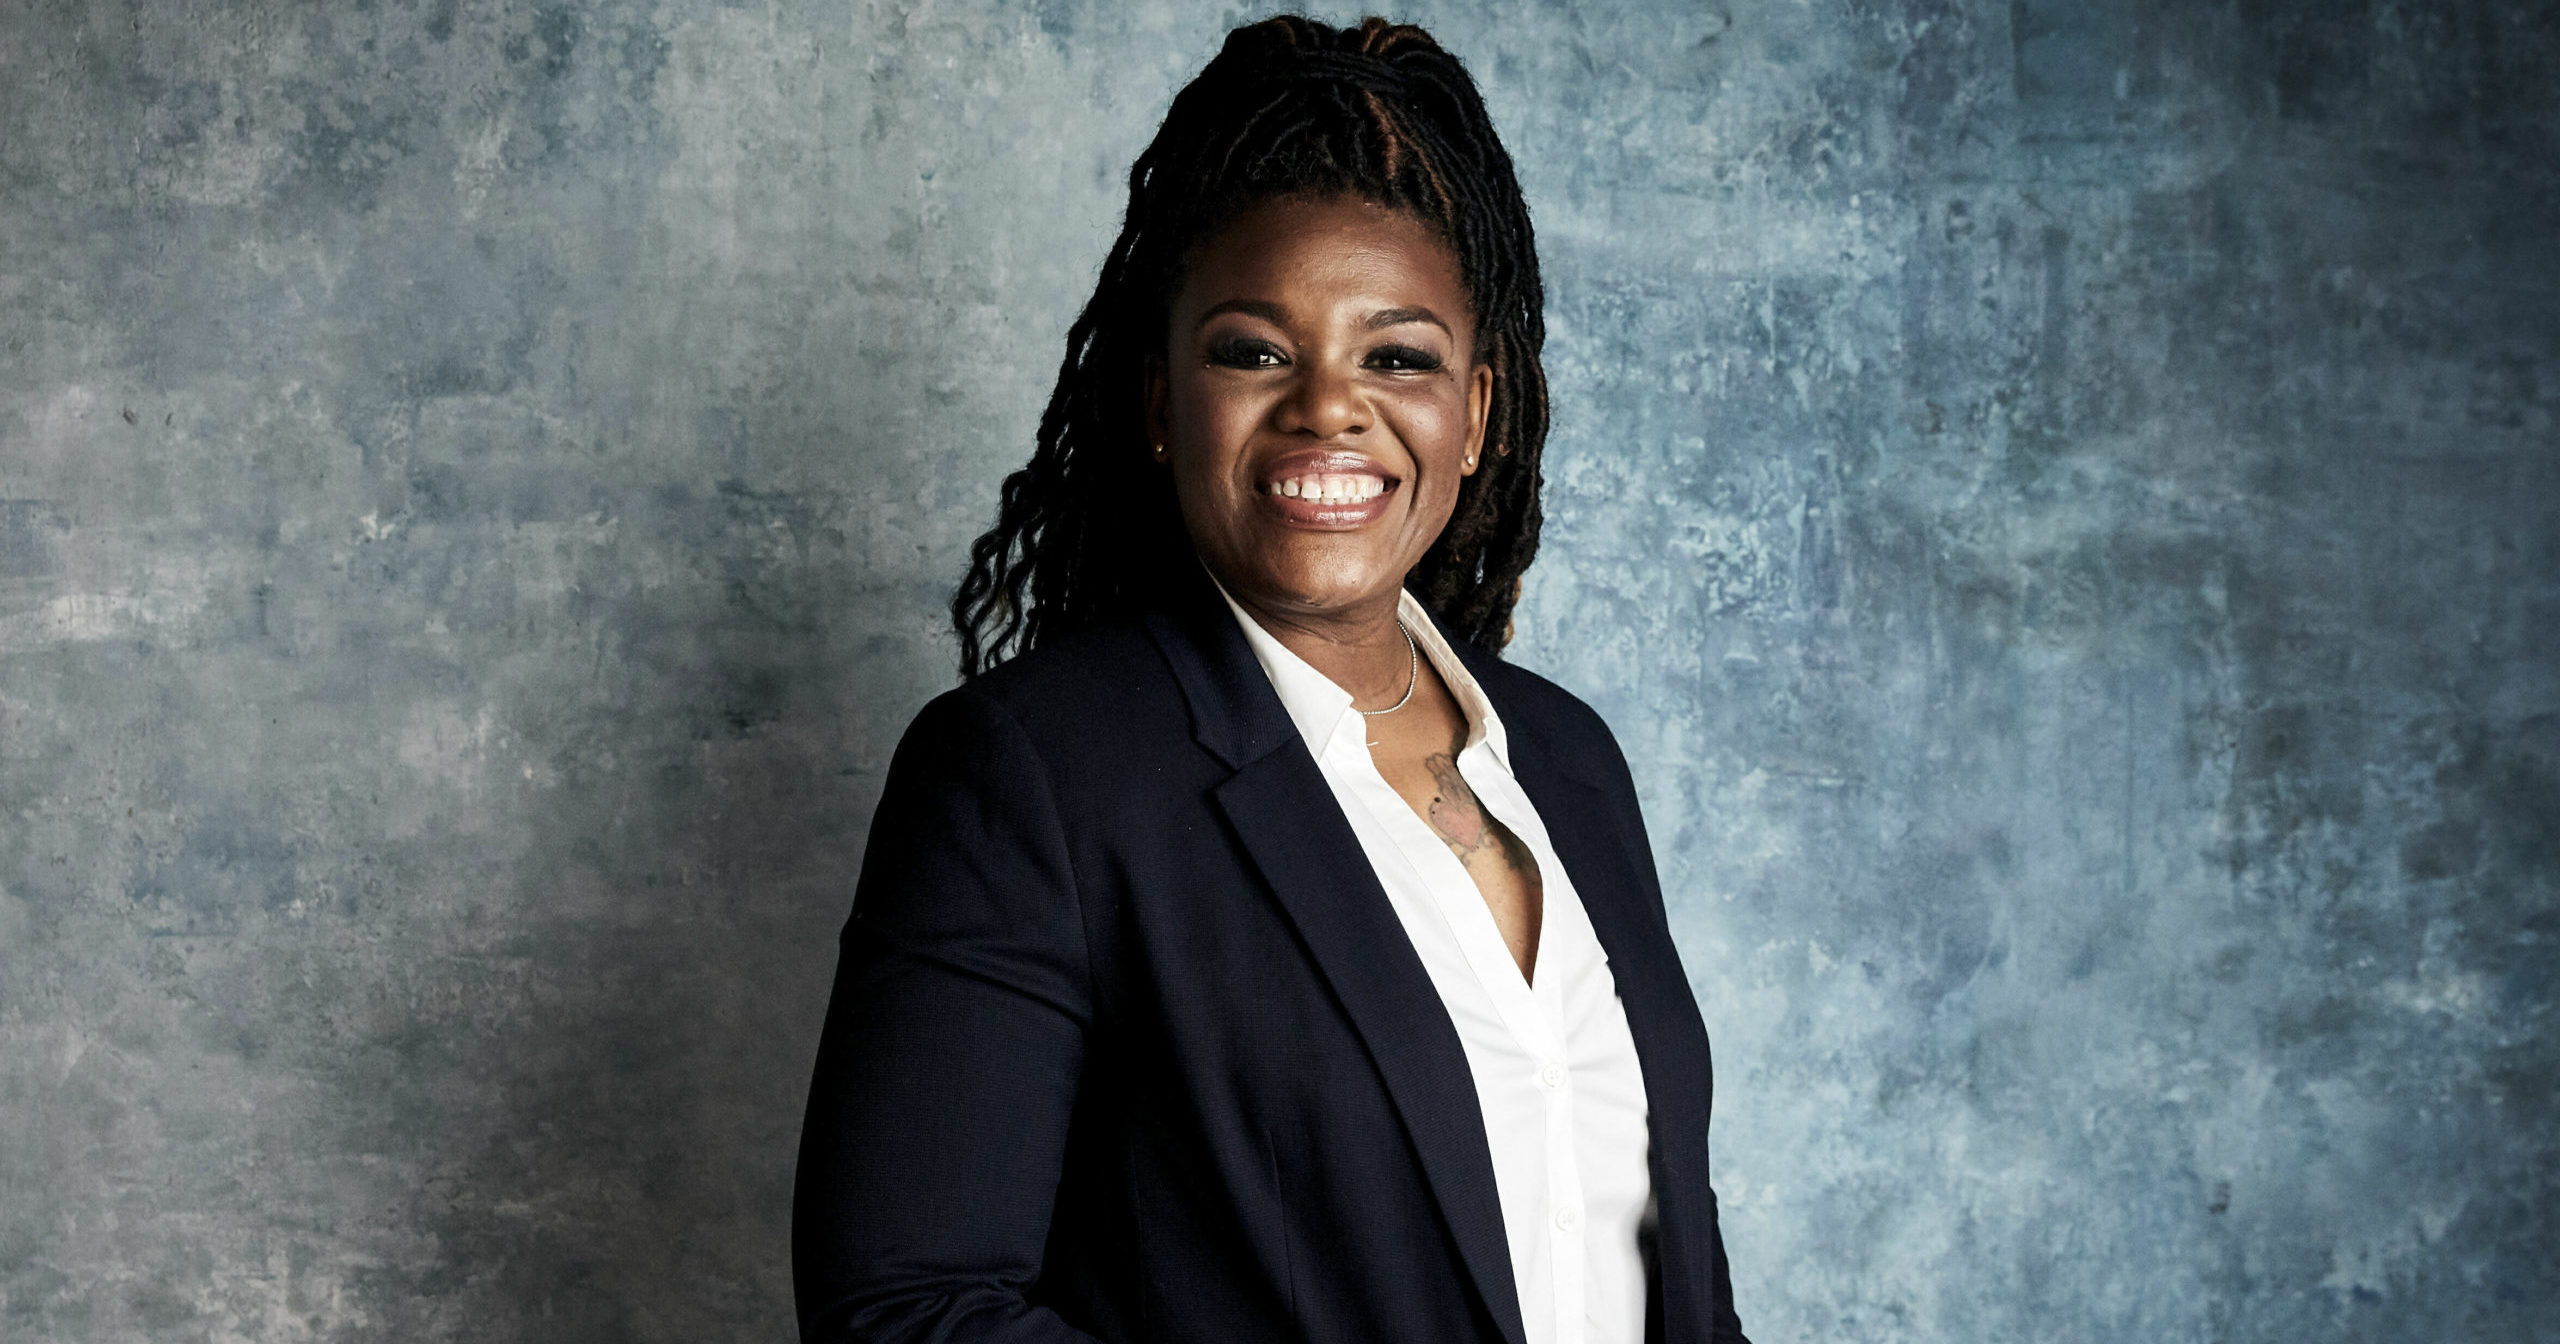 In this Jan. 27, 2019, file photo, Cori Bush poses for a portrait to promote the film "Knock Down the House" at the Salesforce Music Lodge during the Sundance Film Festival in Park City, Utah. Bush ousted longtime Rep. William Lacy Clay on Tuesday in Missouri's Democratic primary, ending a political dynasty that has spanned more than a half-century. Bush's victory came in a rematch of 2018, when she failed to capitalize on a national Democratic wave that favored political newcomers such as Bush’s friend, Rep. Alexandria Ocasio-Cortez.